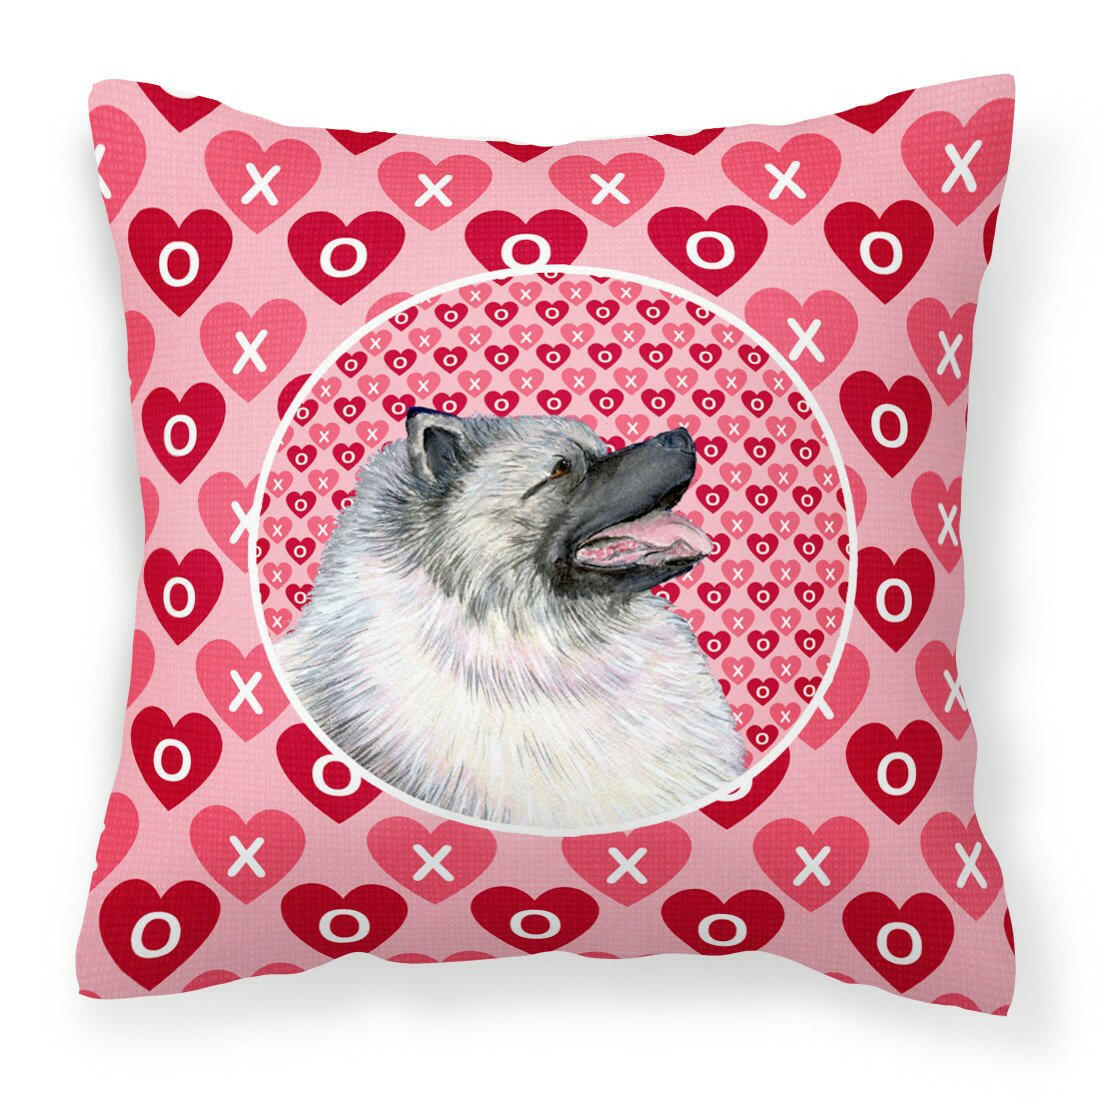 Keeshond Hearts Love and Valentine's Day Portrait Fabric Decorative Pillow SS4488PW1414 by Caroline's Treasures